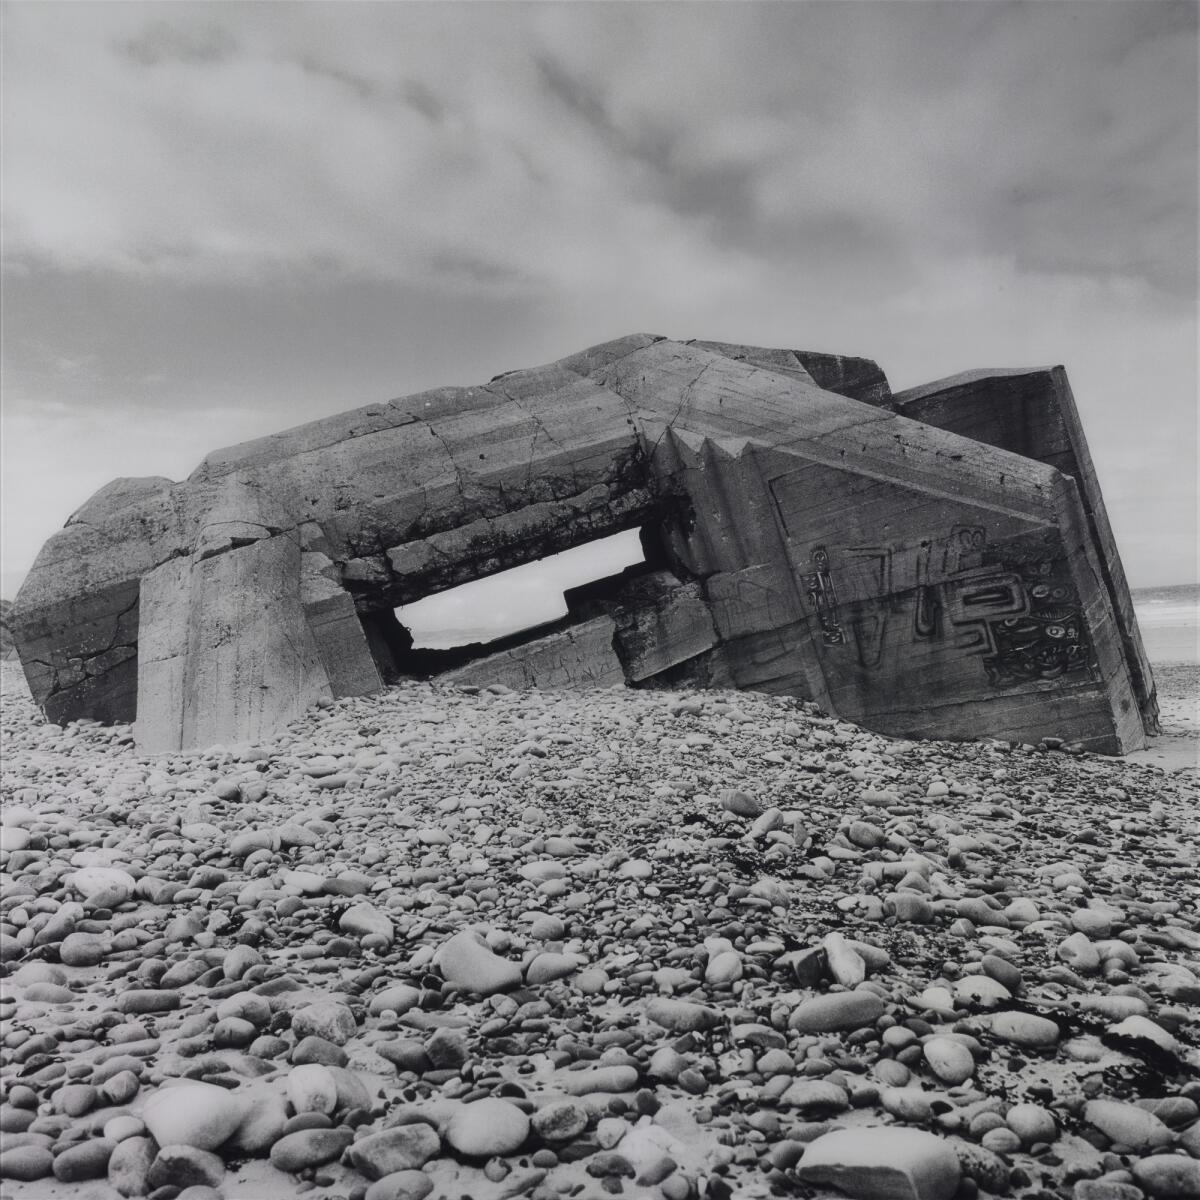 "Casemate SK667," 2006, by Jane and Louise Wilson. (Jane and Louise Wilson / The J. Paul Getty Museum)